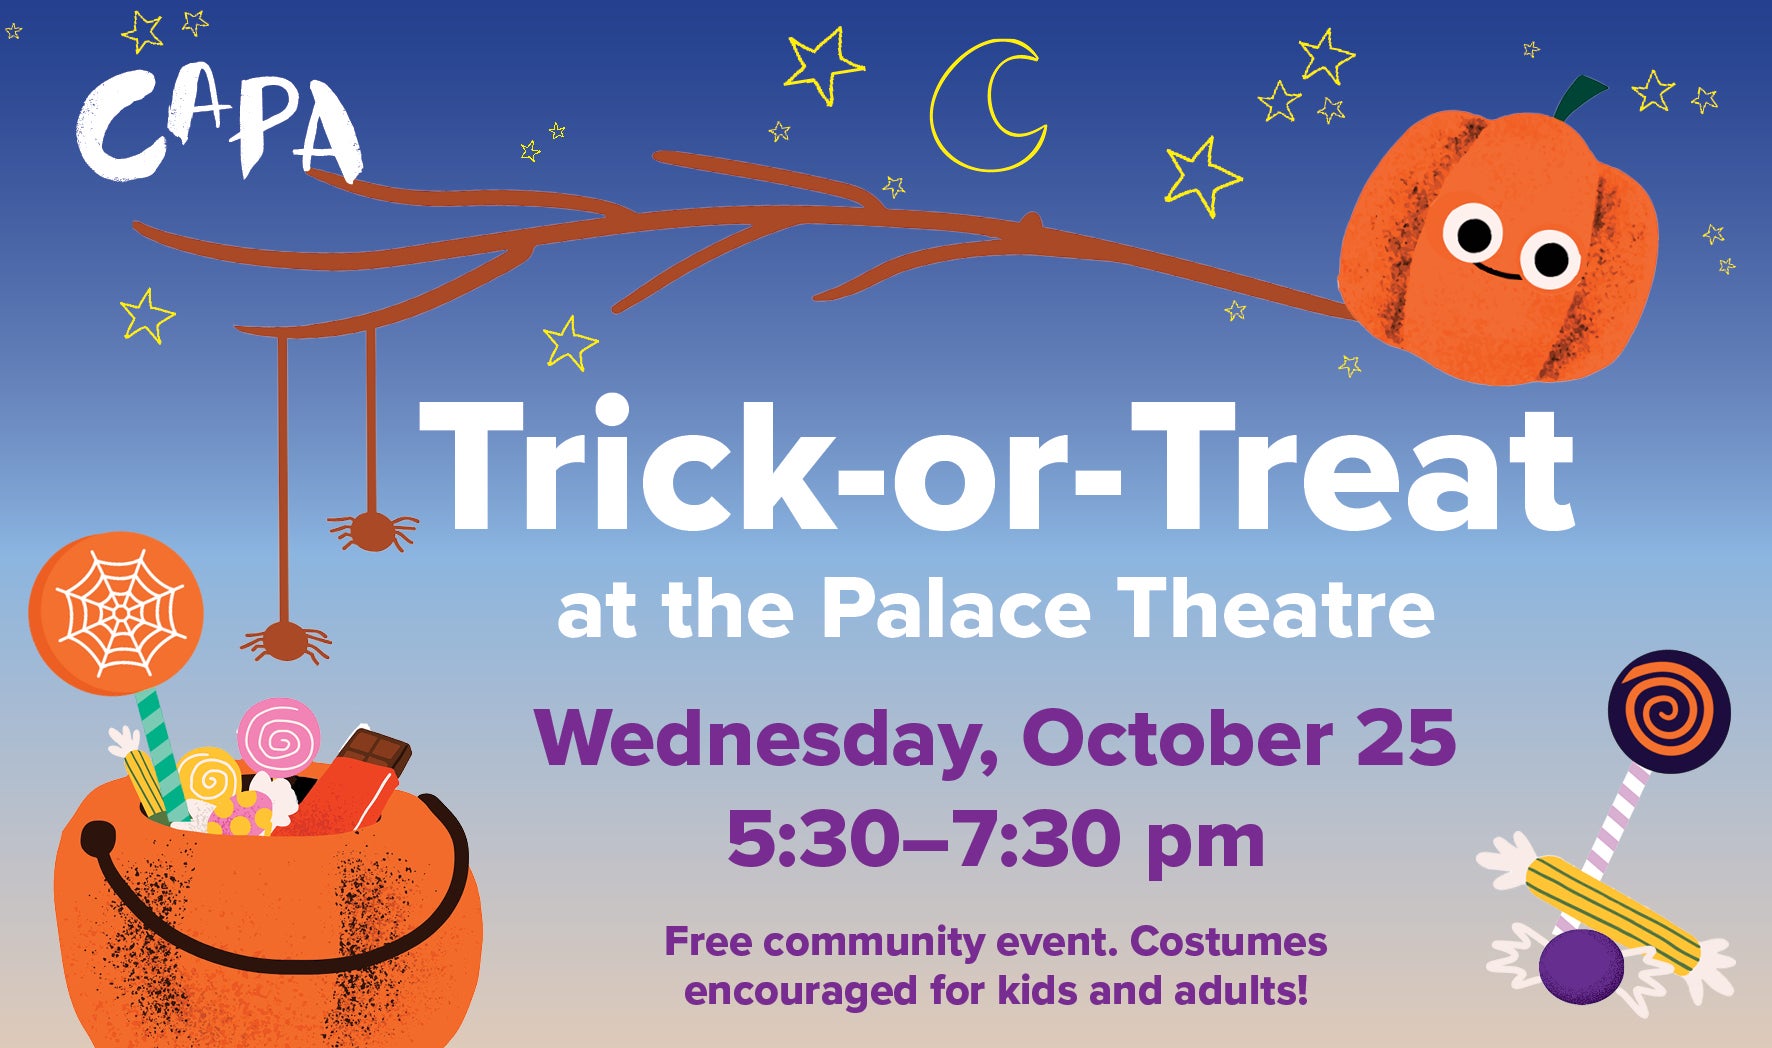 Trick-or-Treat at the Palace Theatre